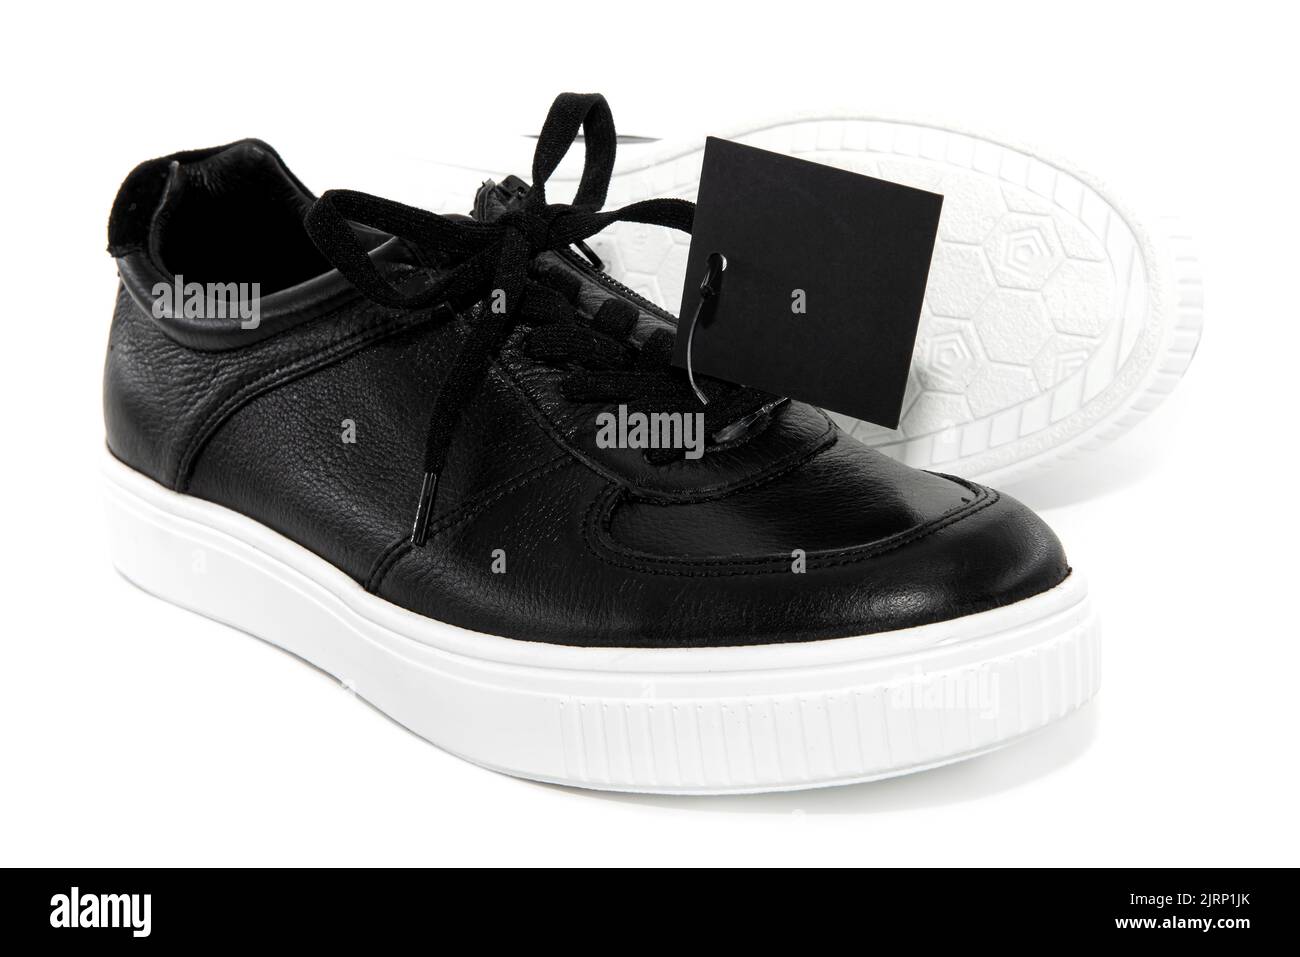 Men's black boots with a white sole on a white background. Shoes isolate with price tag for inscription Stock Photo